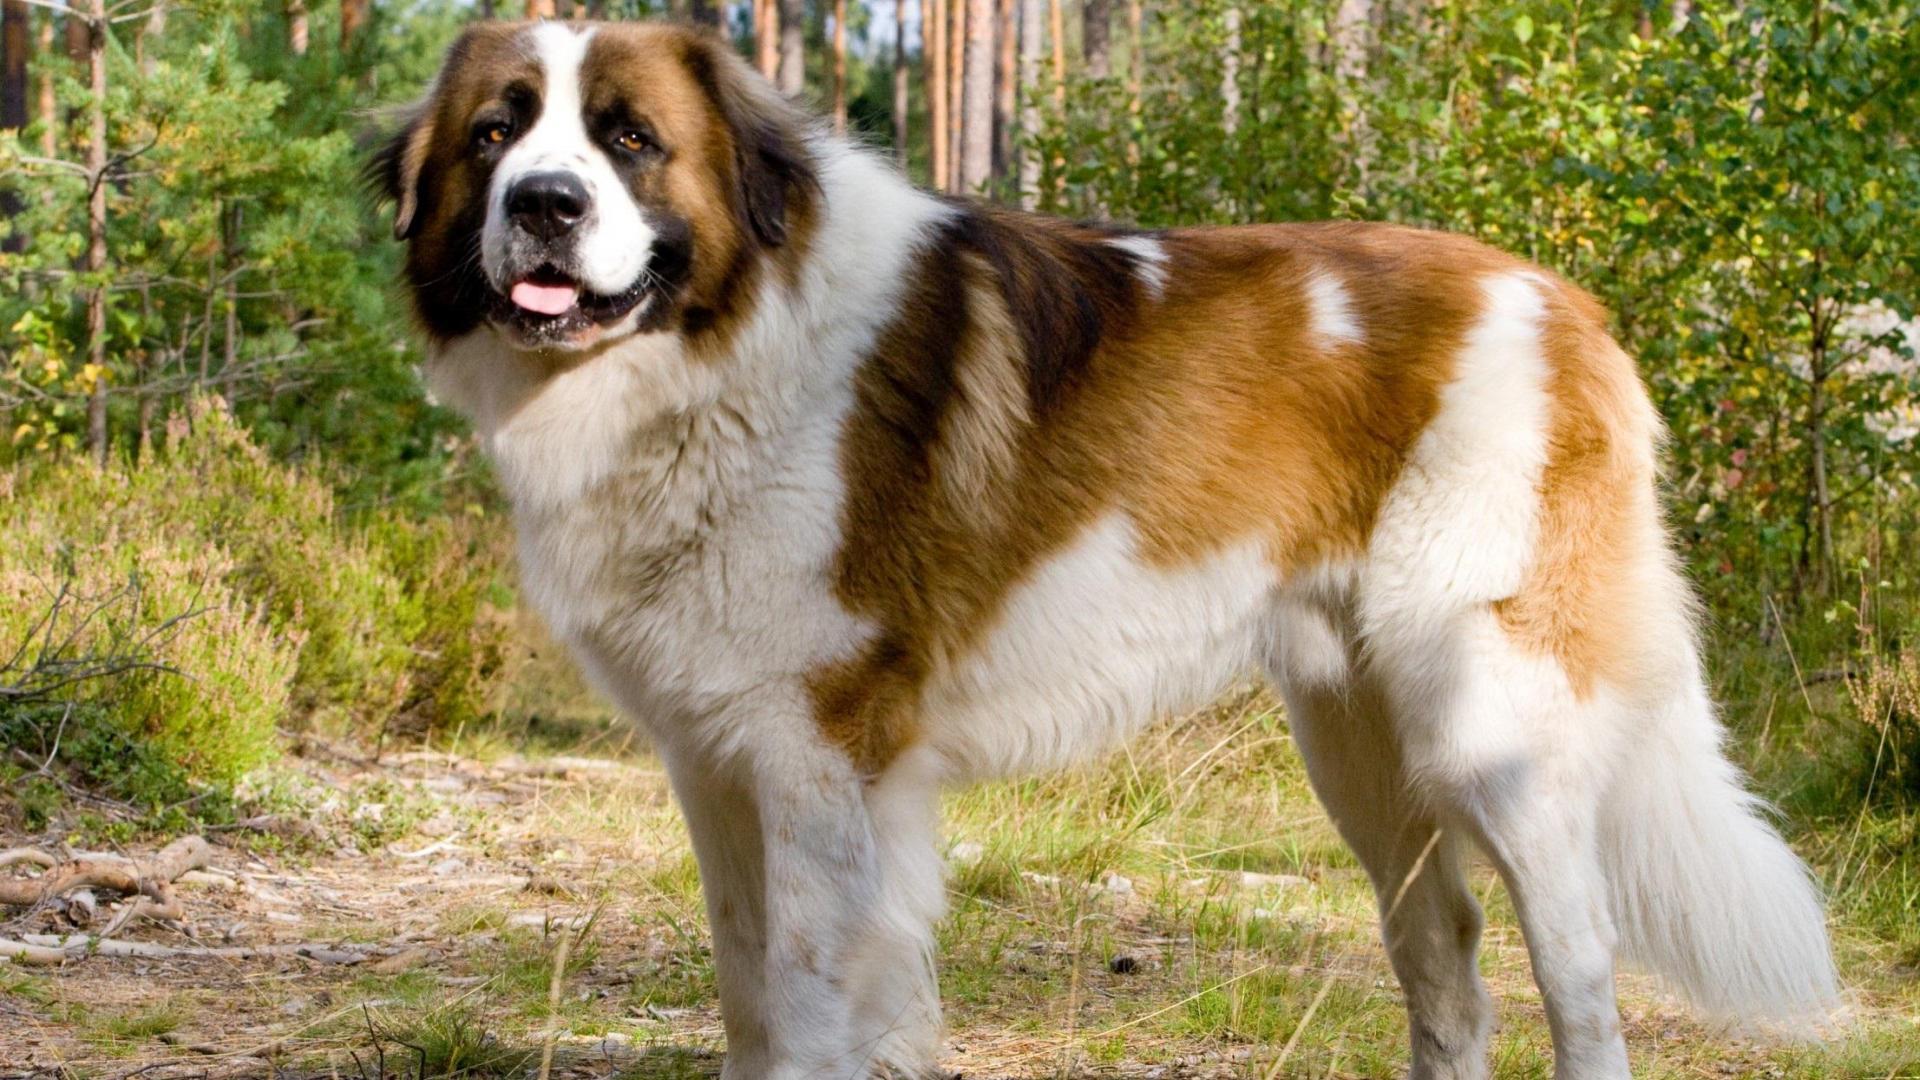 St Bernard Dog In The Park Wallpaper And Image